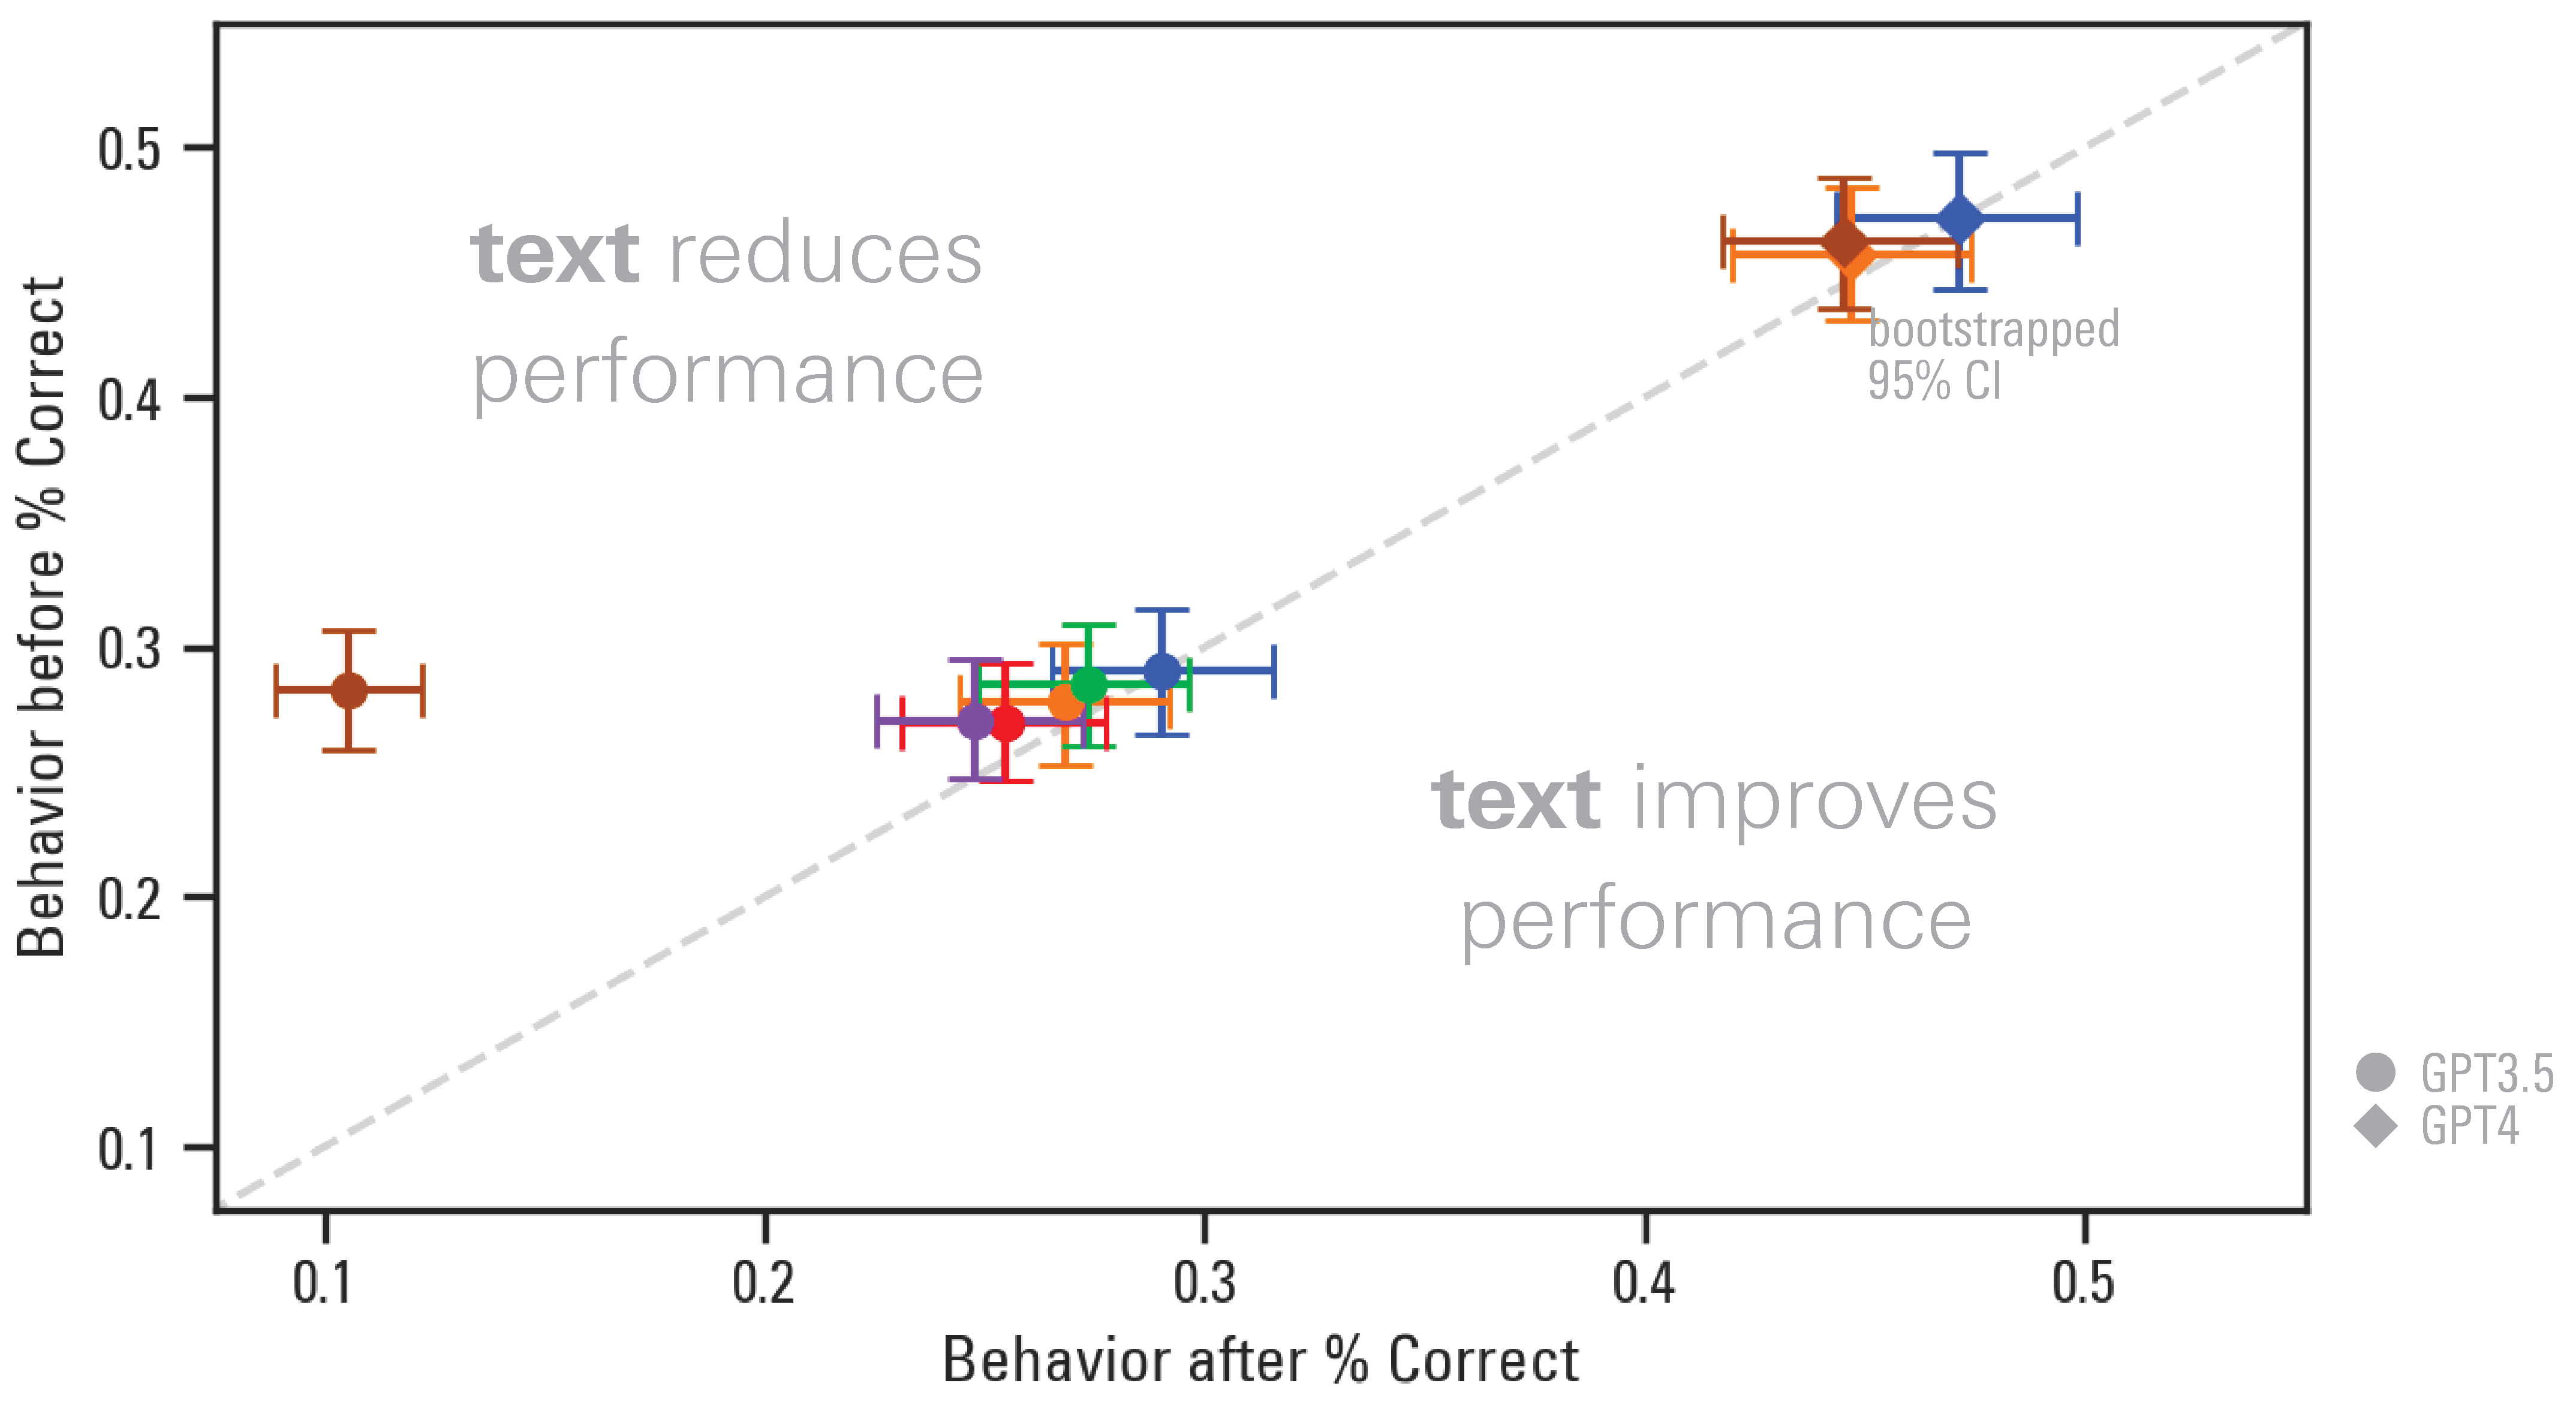 The order manipulation does not change the mean accuracy if the `text` is provided after the `behavior`. The location of each dot corresponds to the % of correct answers to the prompt type if the `text` is given before (vertical) or after (horizontal) the `behavior`. The color of the dot corresponds to the question type (see above), and the shape to the underlying model: round for GPT3.5 (about 30% of questions correct) and diamond for GPT4(about 45% correct).